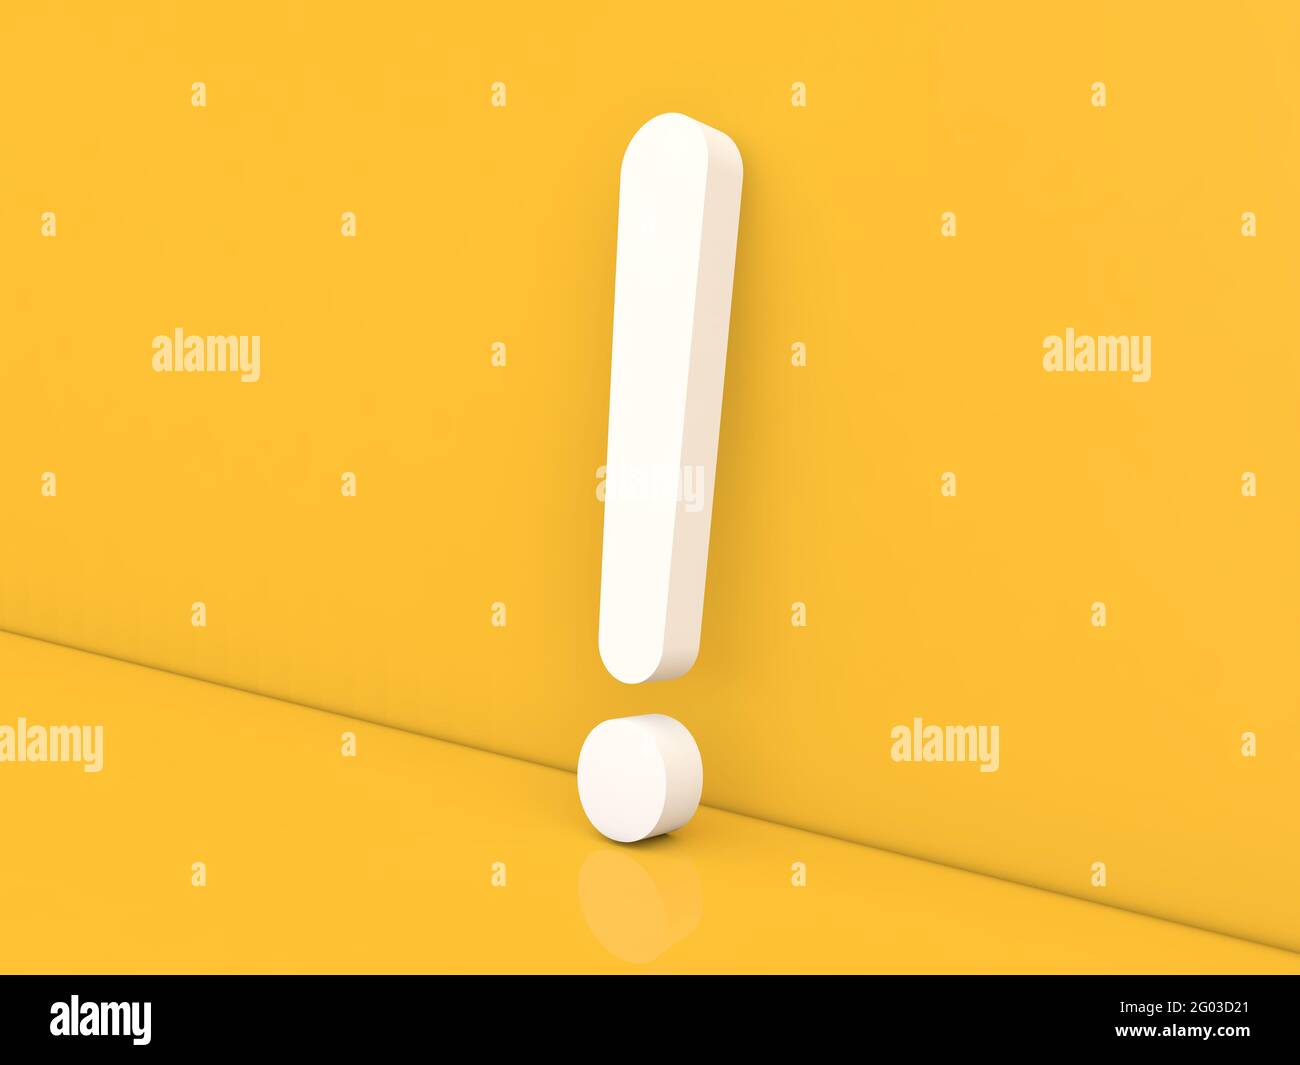 Exclamation mark on a yellow background. 3d render illustration. Stock Photo